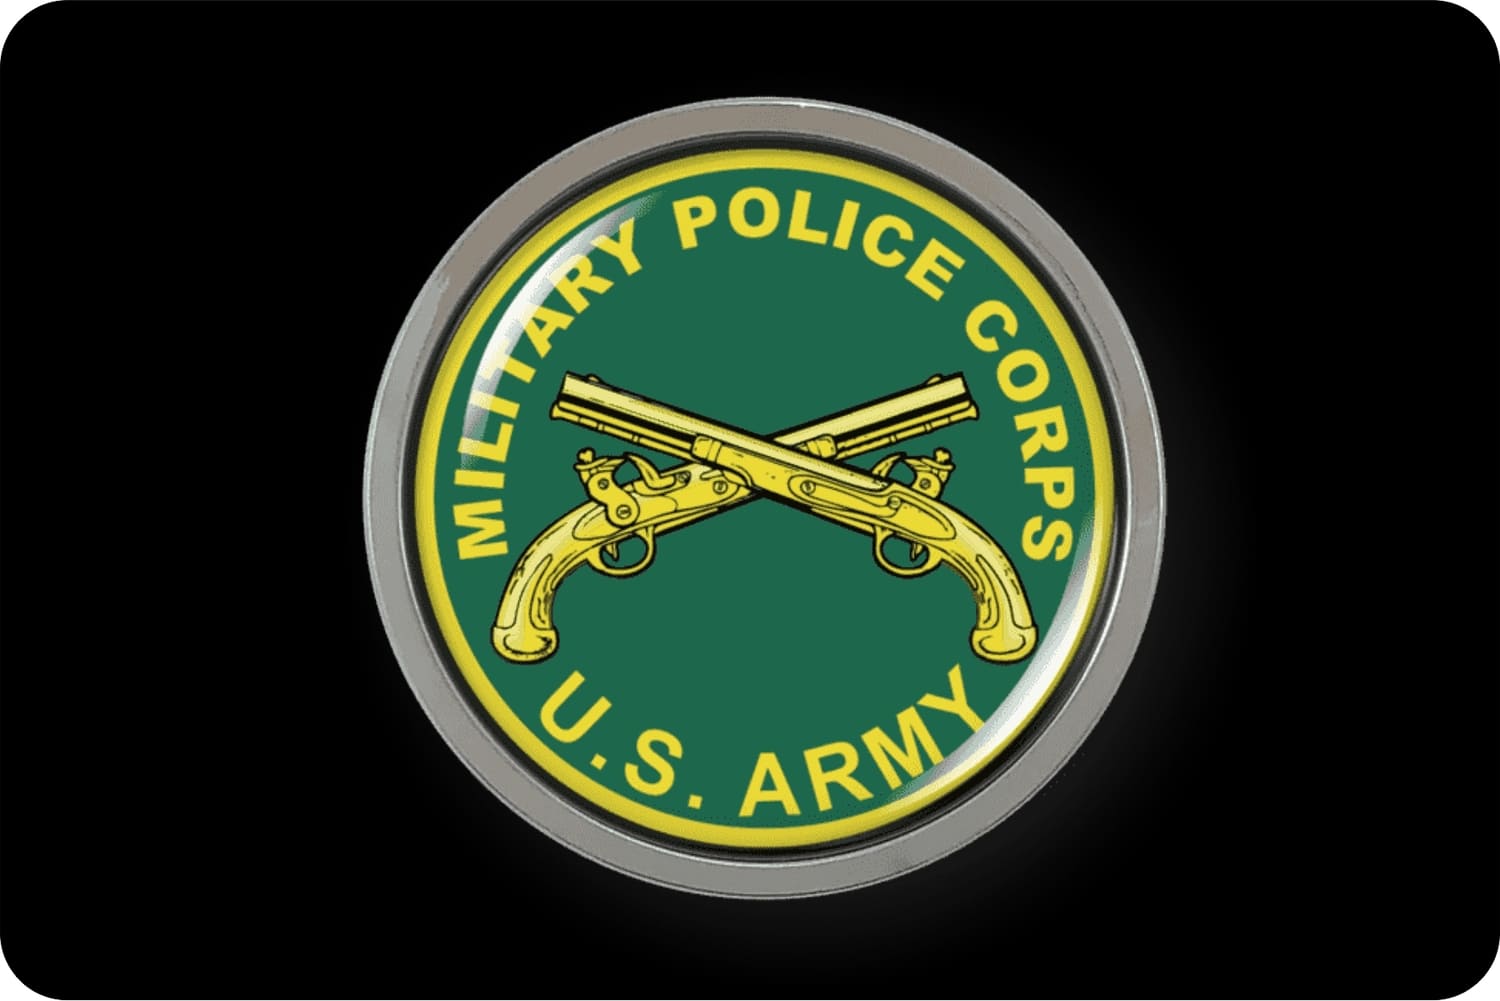 Military Police - Custom trailer hitch cover